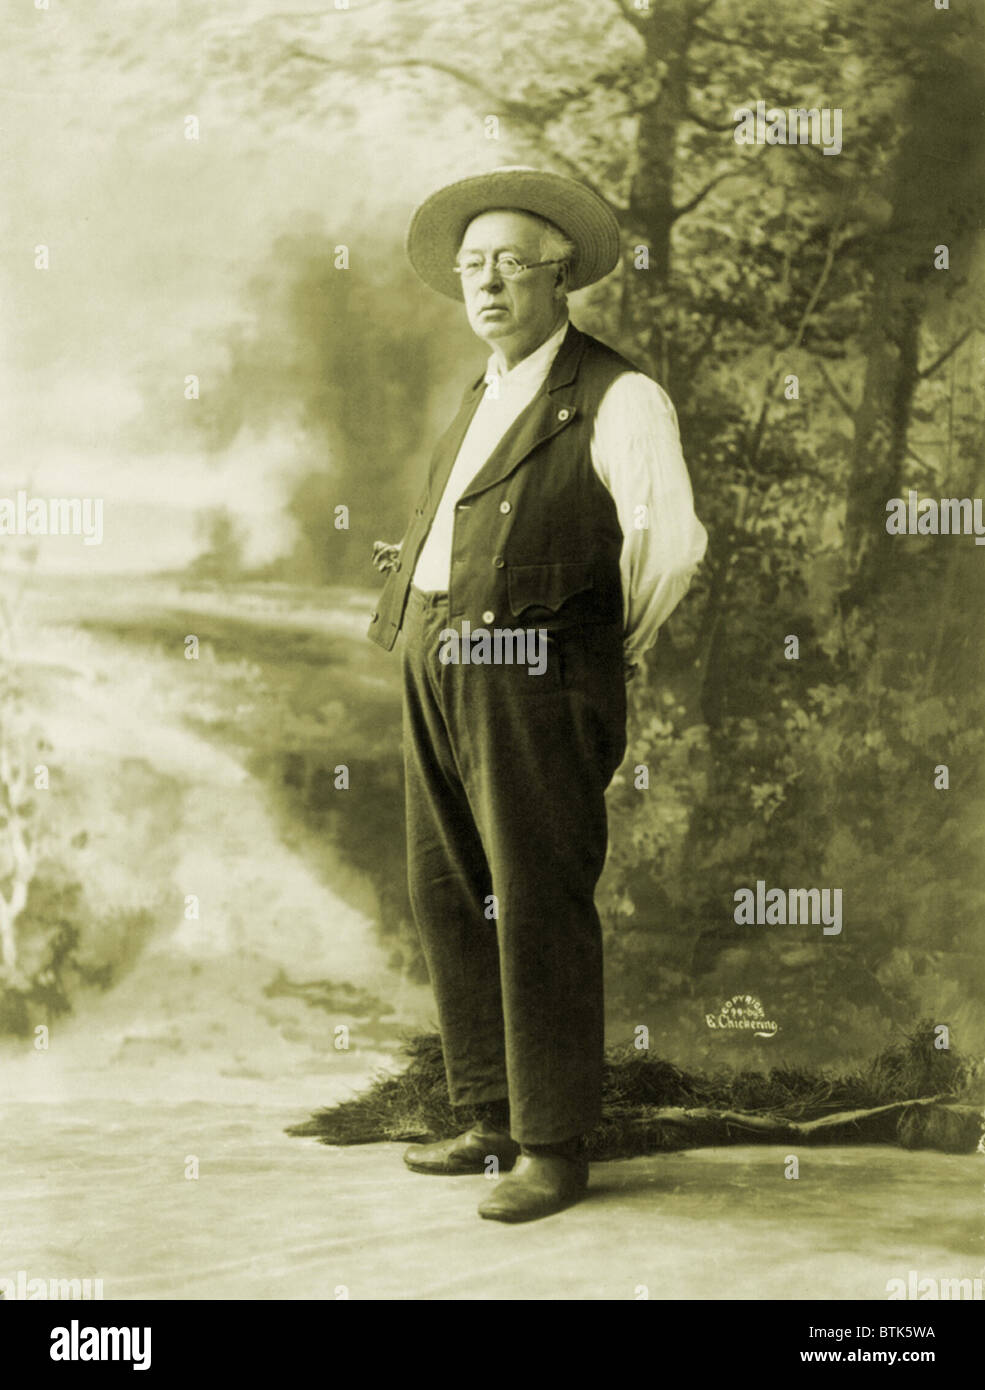 Denman Thompson (1833-1911) , American playwright and actor who career was based on one hugely successful role, that of Josh from his play THE OLD HOMESTEAD, 1886. He played Josh, a rural farmer, in baggy pants, an ill-fitting vest, thick glasses, and a large straw hat, who travels to New York to rescue his derelict son. 1900 photo. Stock Photo